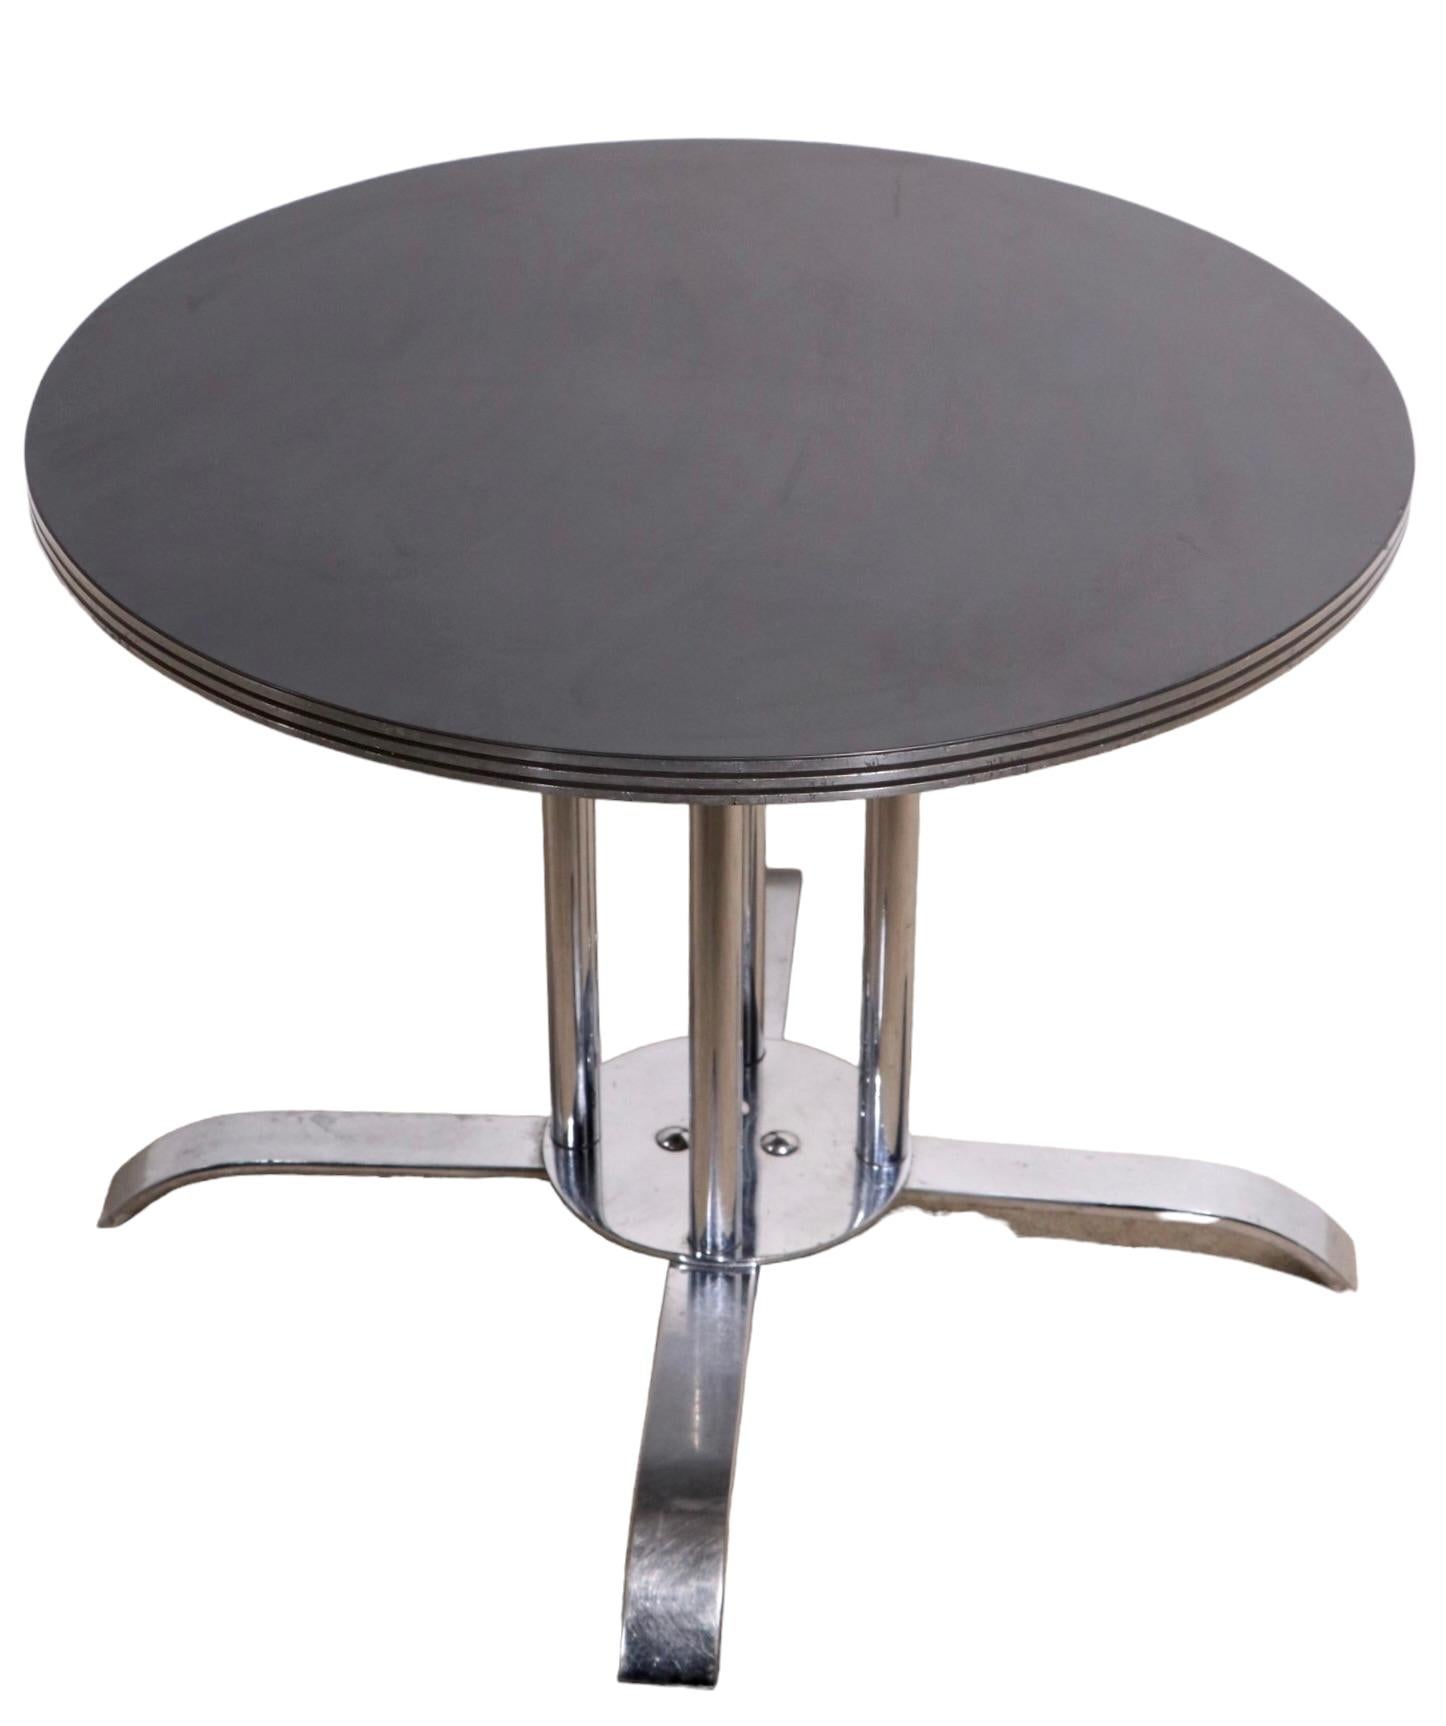 Américain Art Deco Machine Age Chrome Table by McKay Craft Furniture Made in USA c 1930's en vente